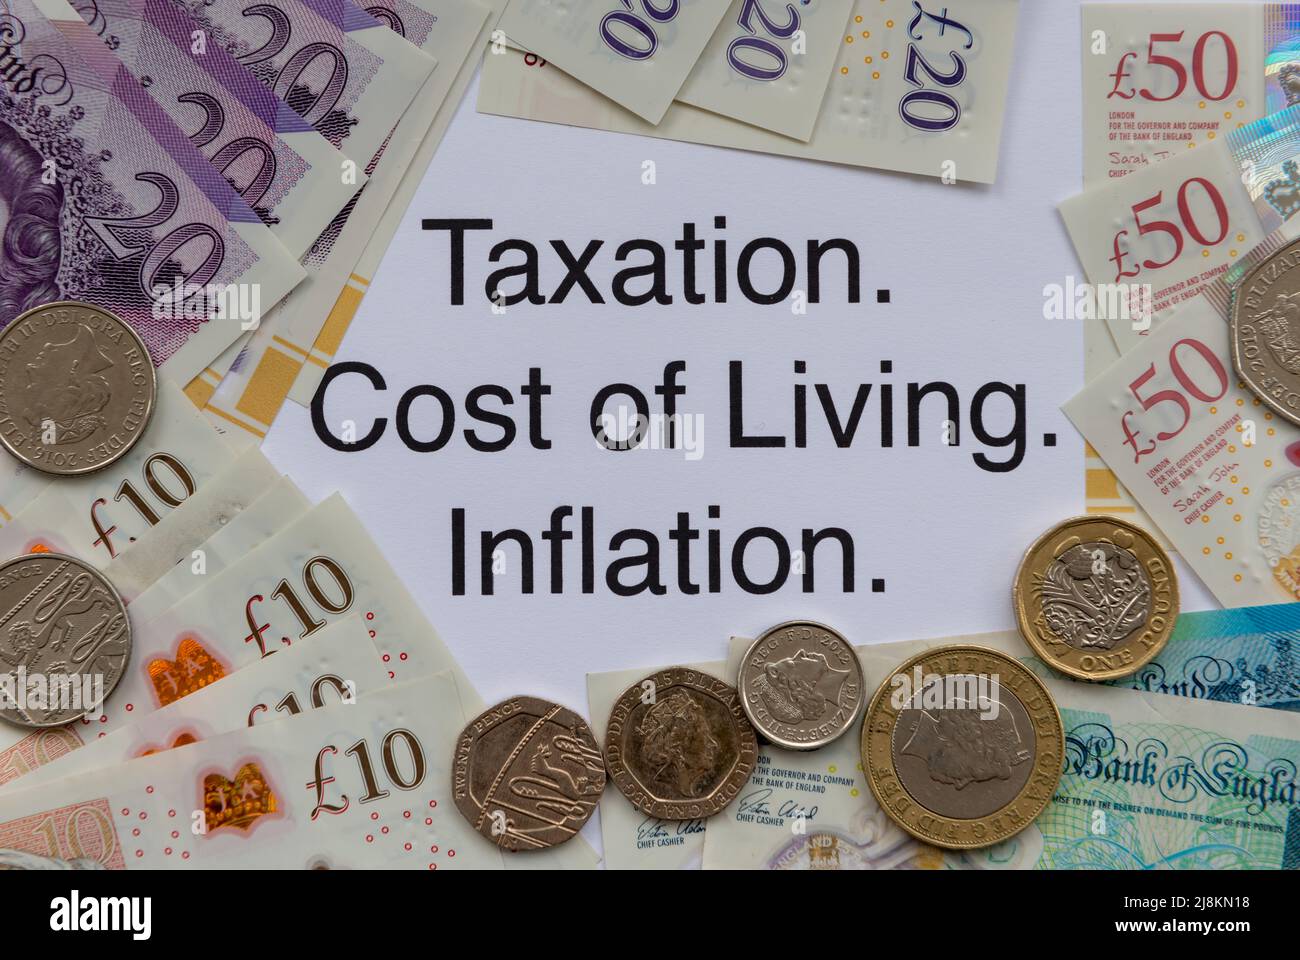 Rising taxation, cost of living and inflation concept with words, bank notes and coins. Stock Photo